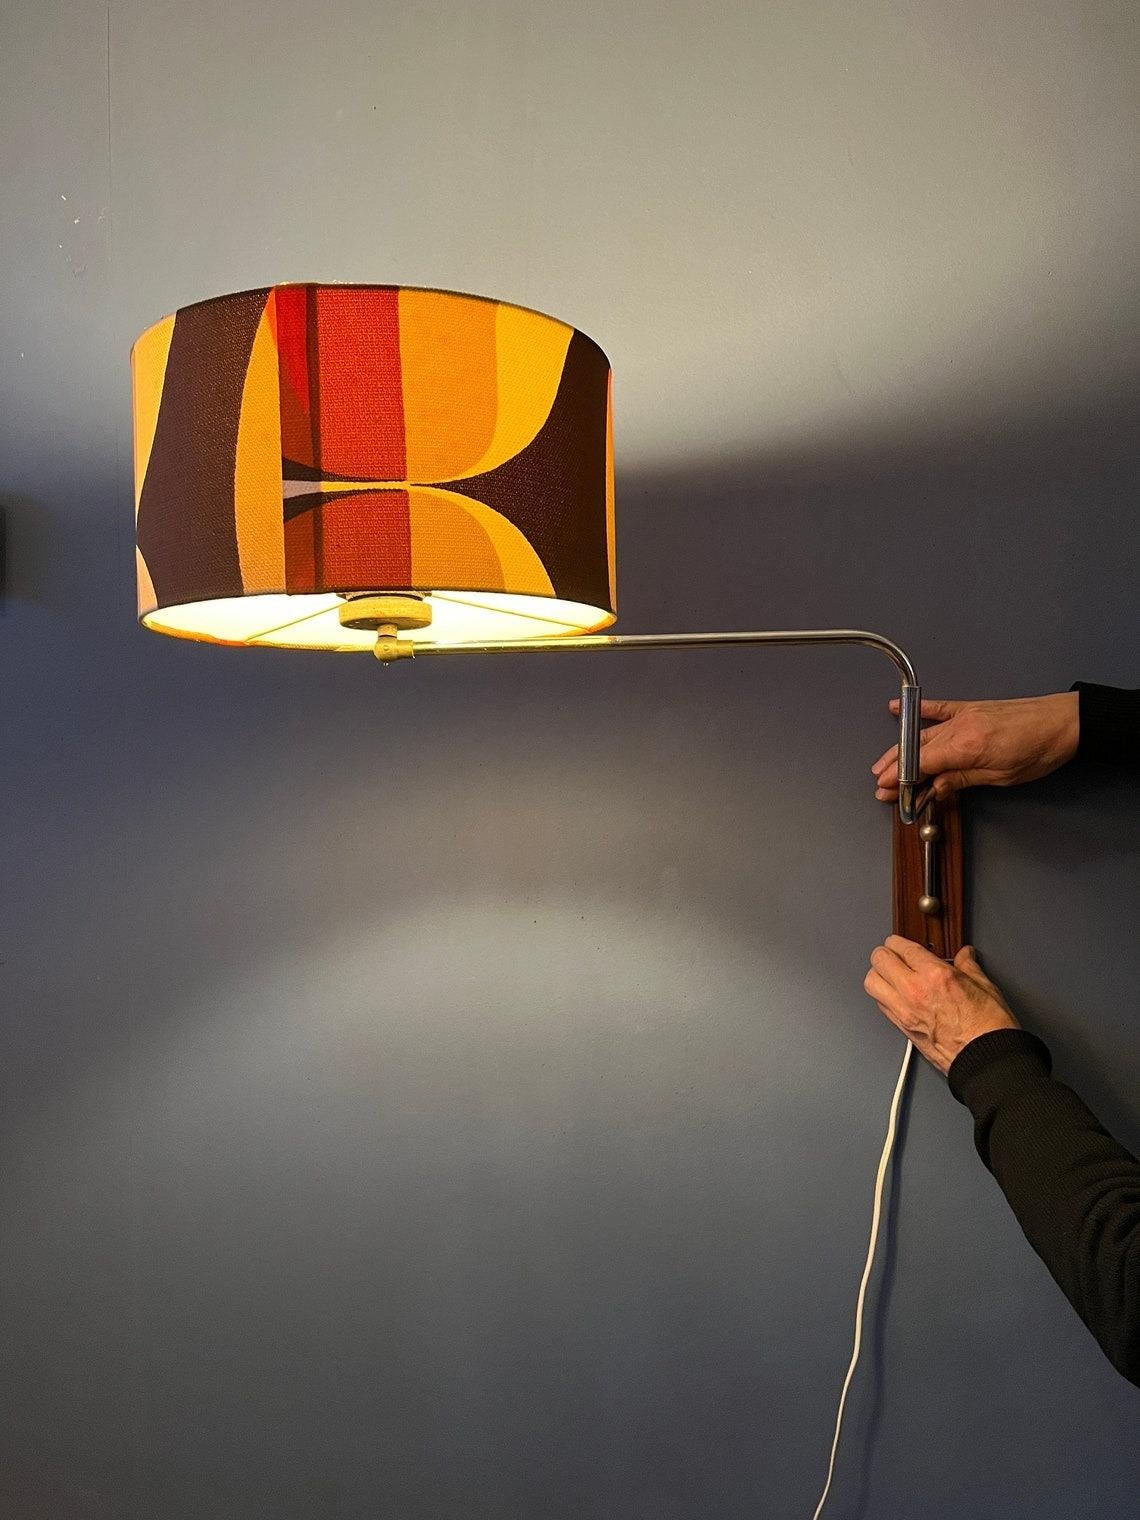 Space age swing-arm wall lamp with orange flower shade. The swing arm allows you to adjust the length of the lamp. Also the position of the shade can be adjusted. The lamp requires an E27 (standard) lightbulb and currently has an EU-plug (works